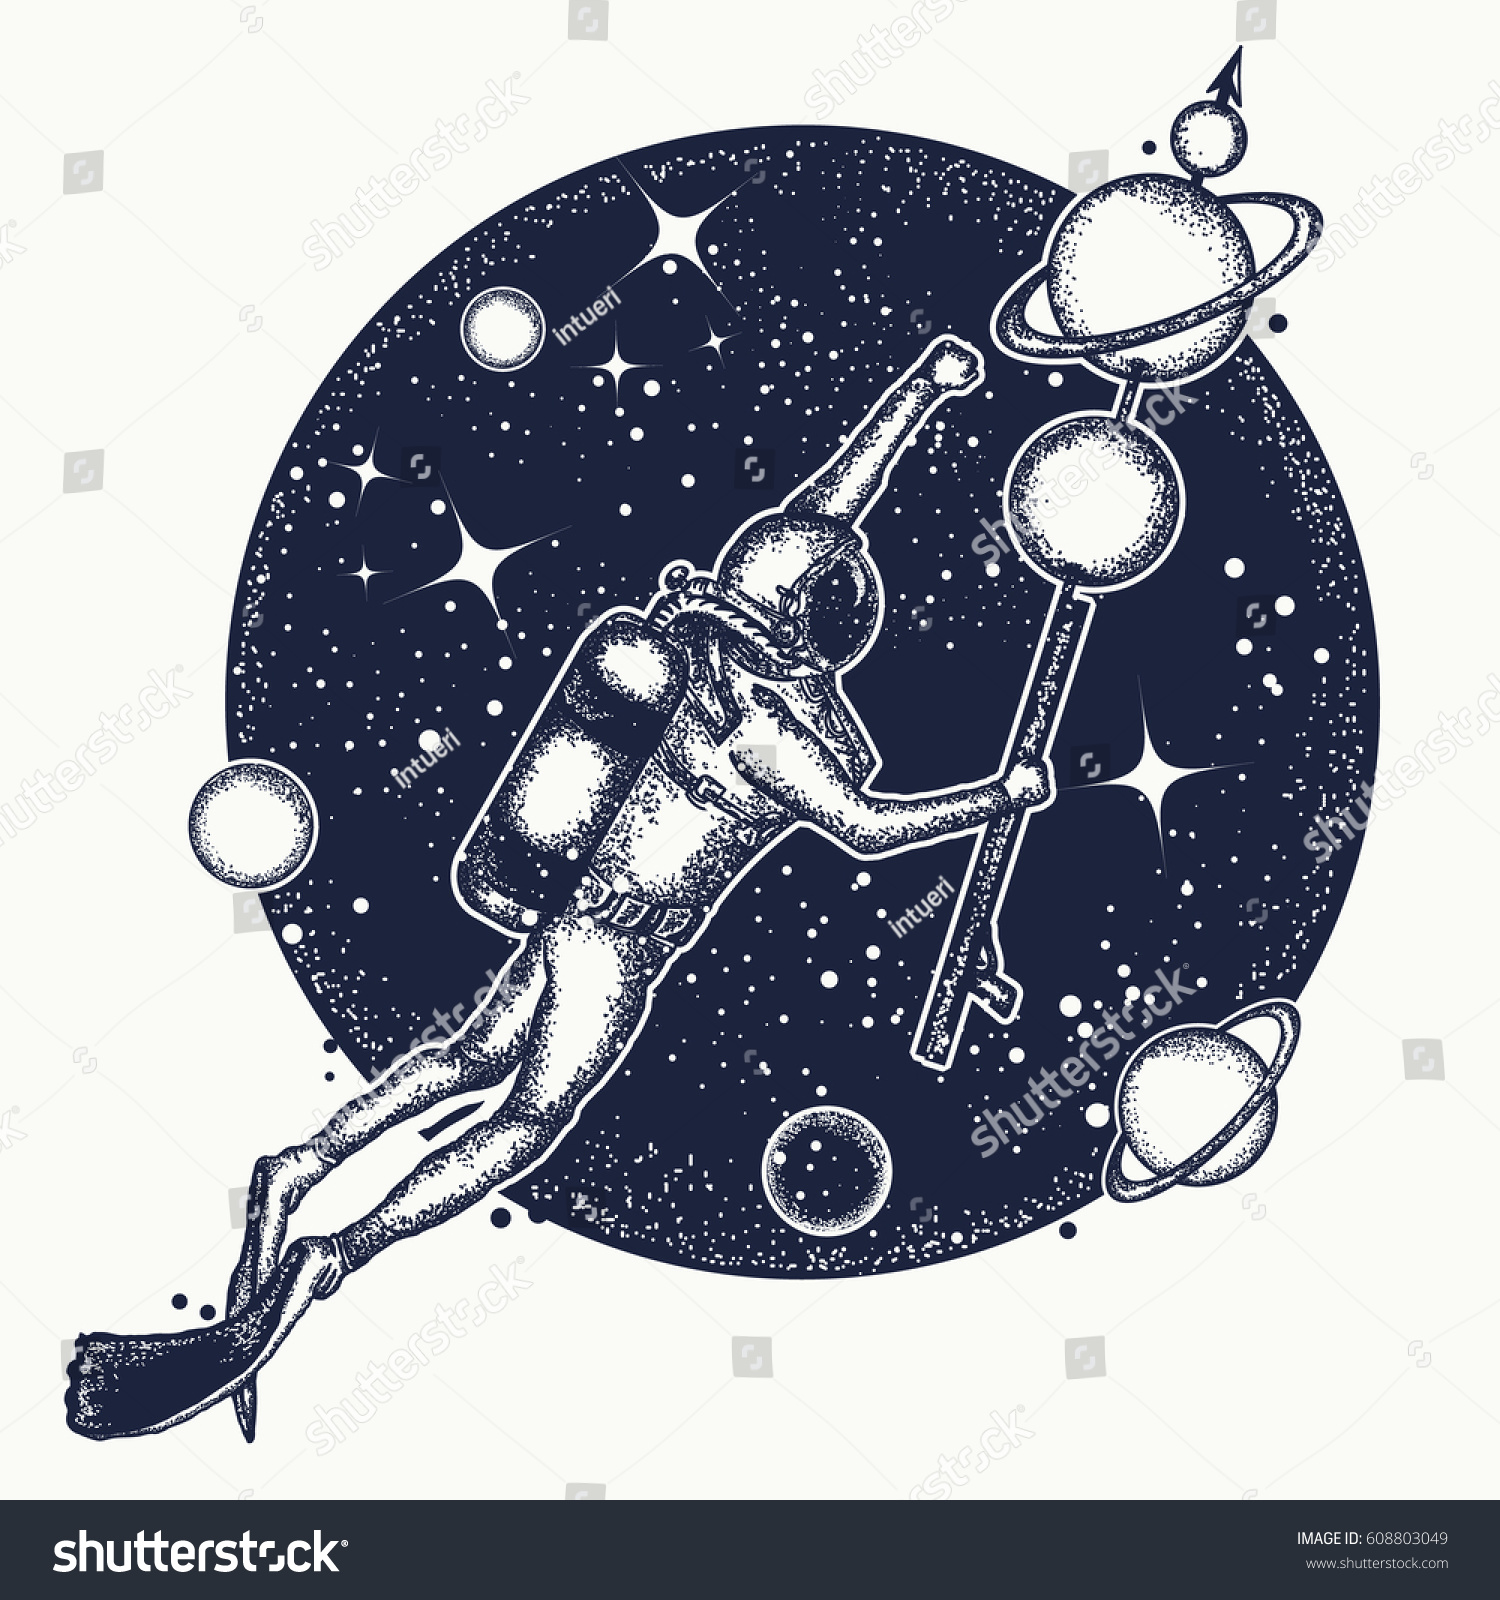 Find Astronaut Deep Space Tshirt Design Diver stock images in HD and millio...